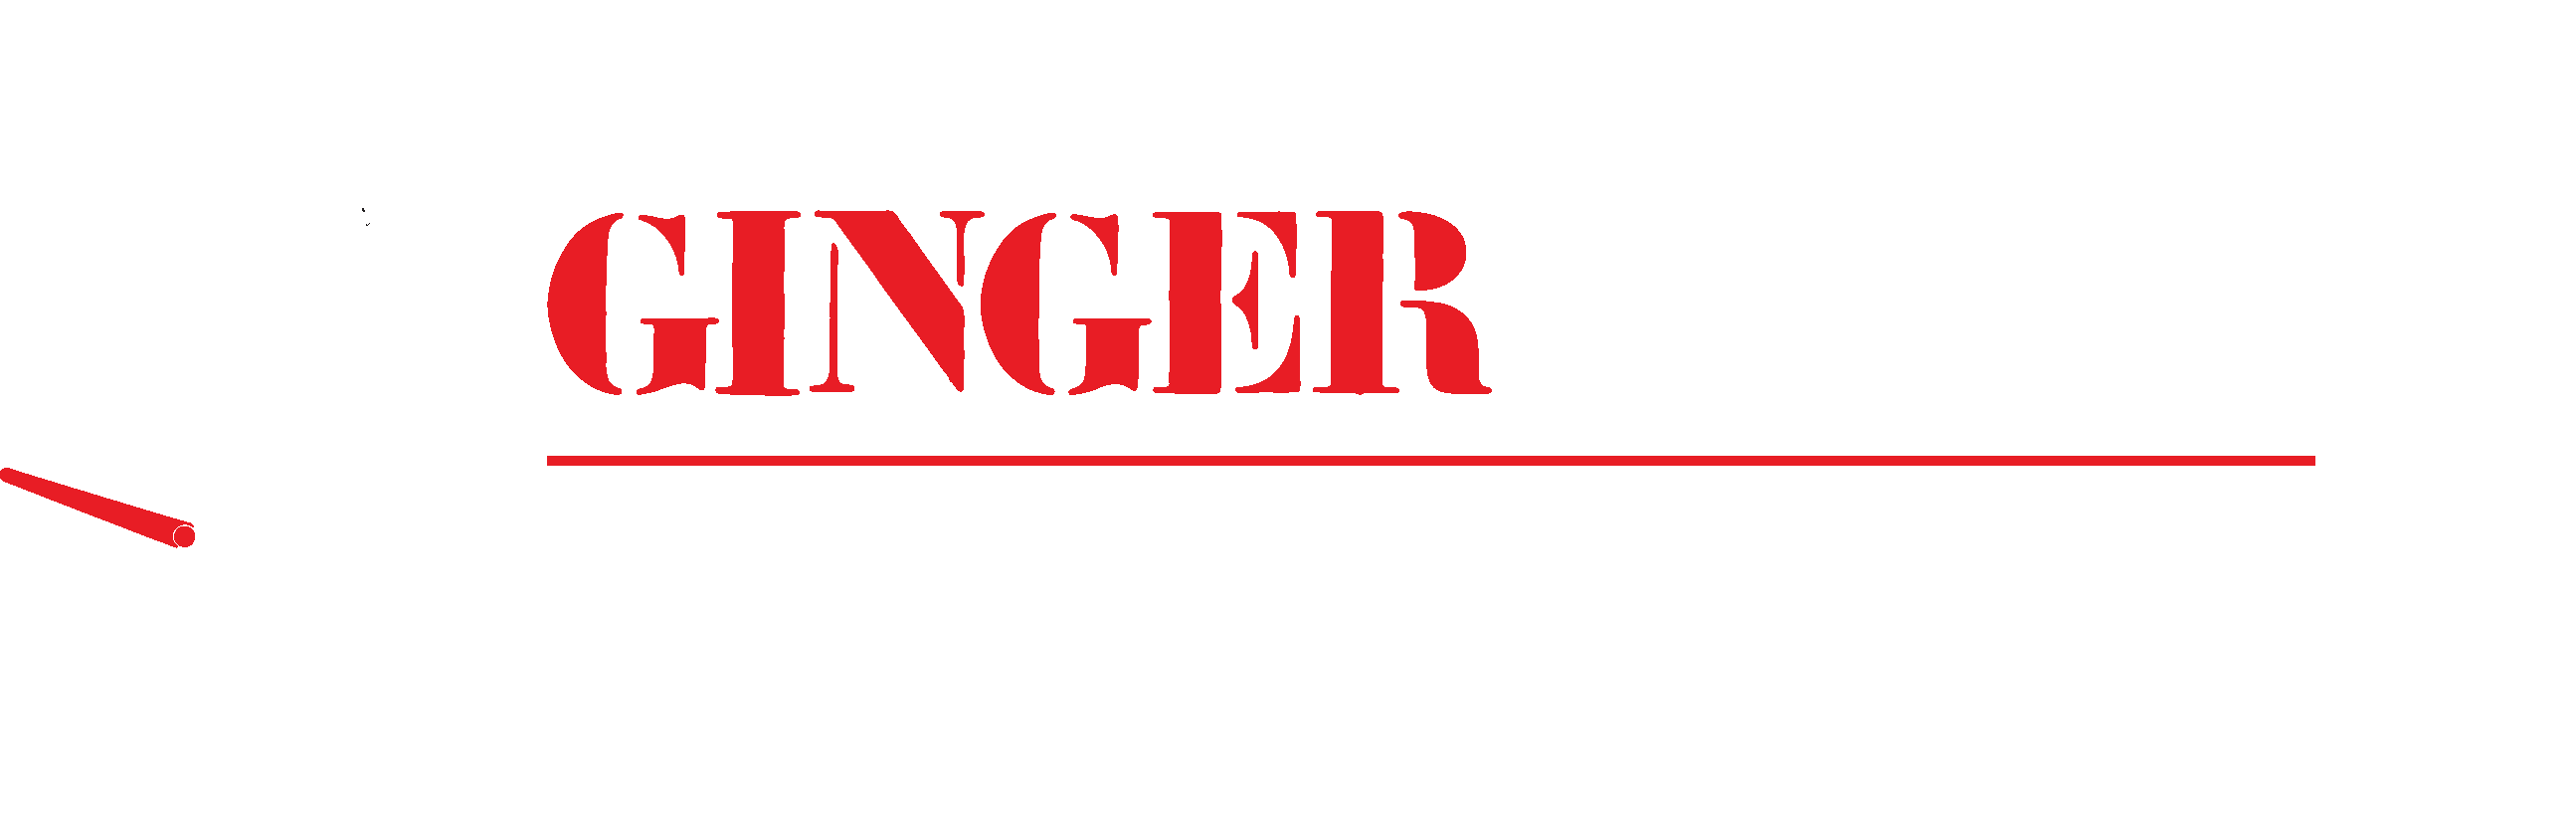 a.s.d. Ginger Company